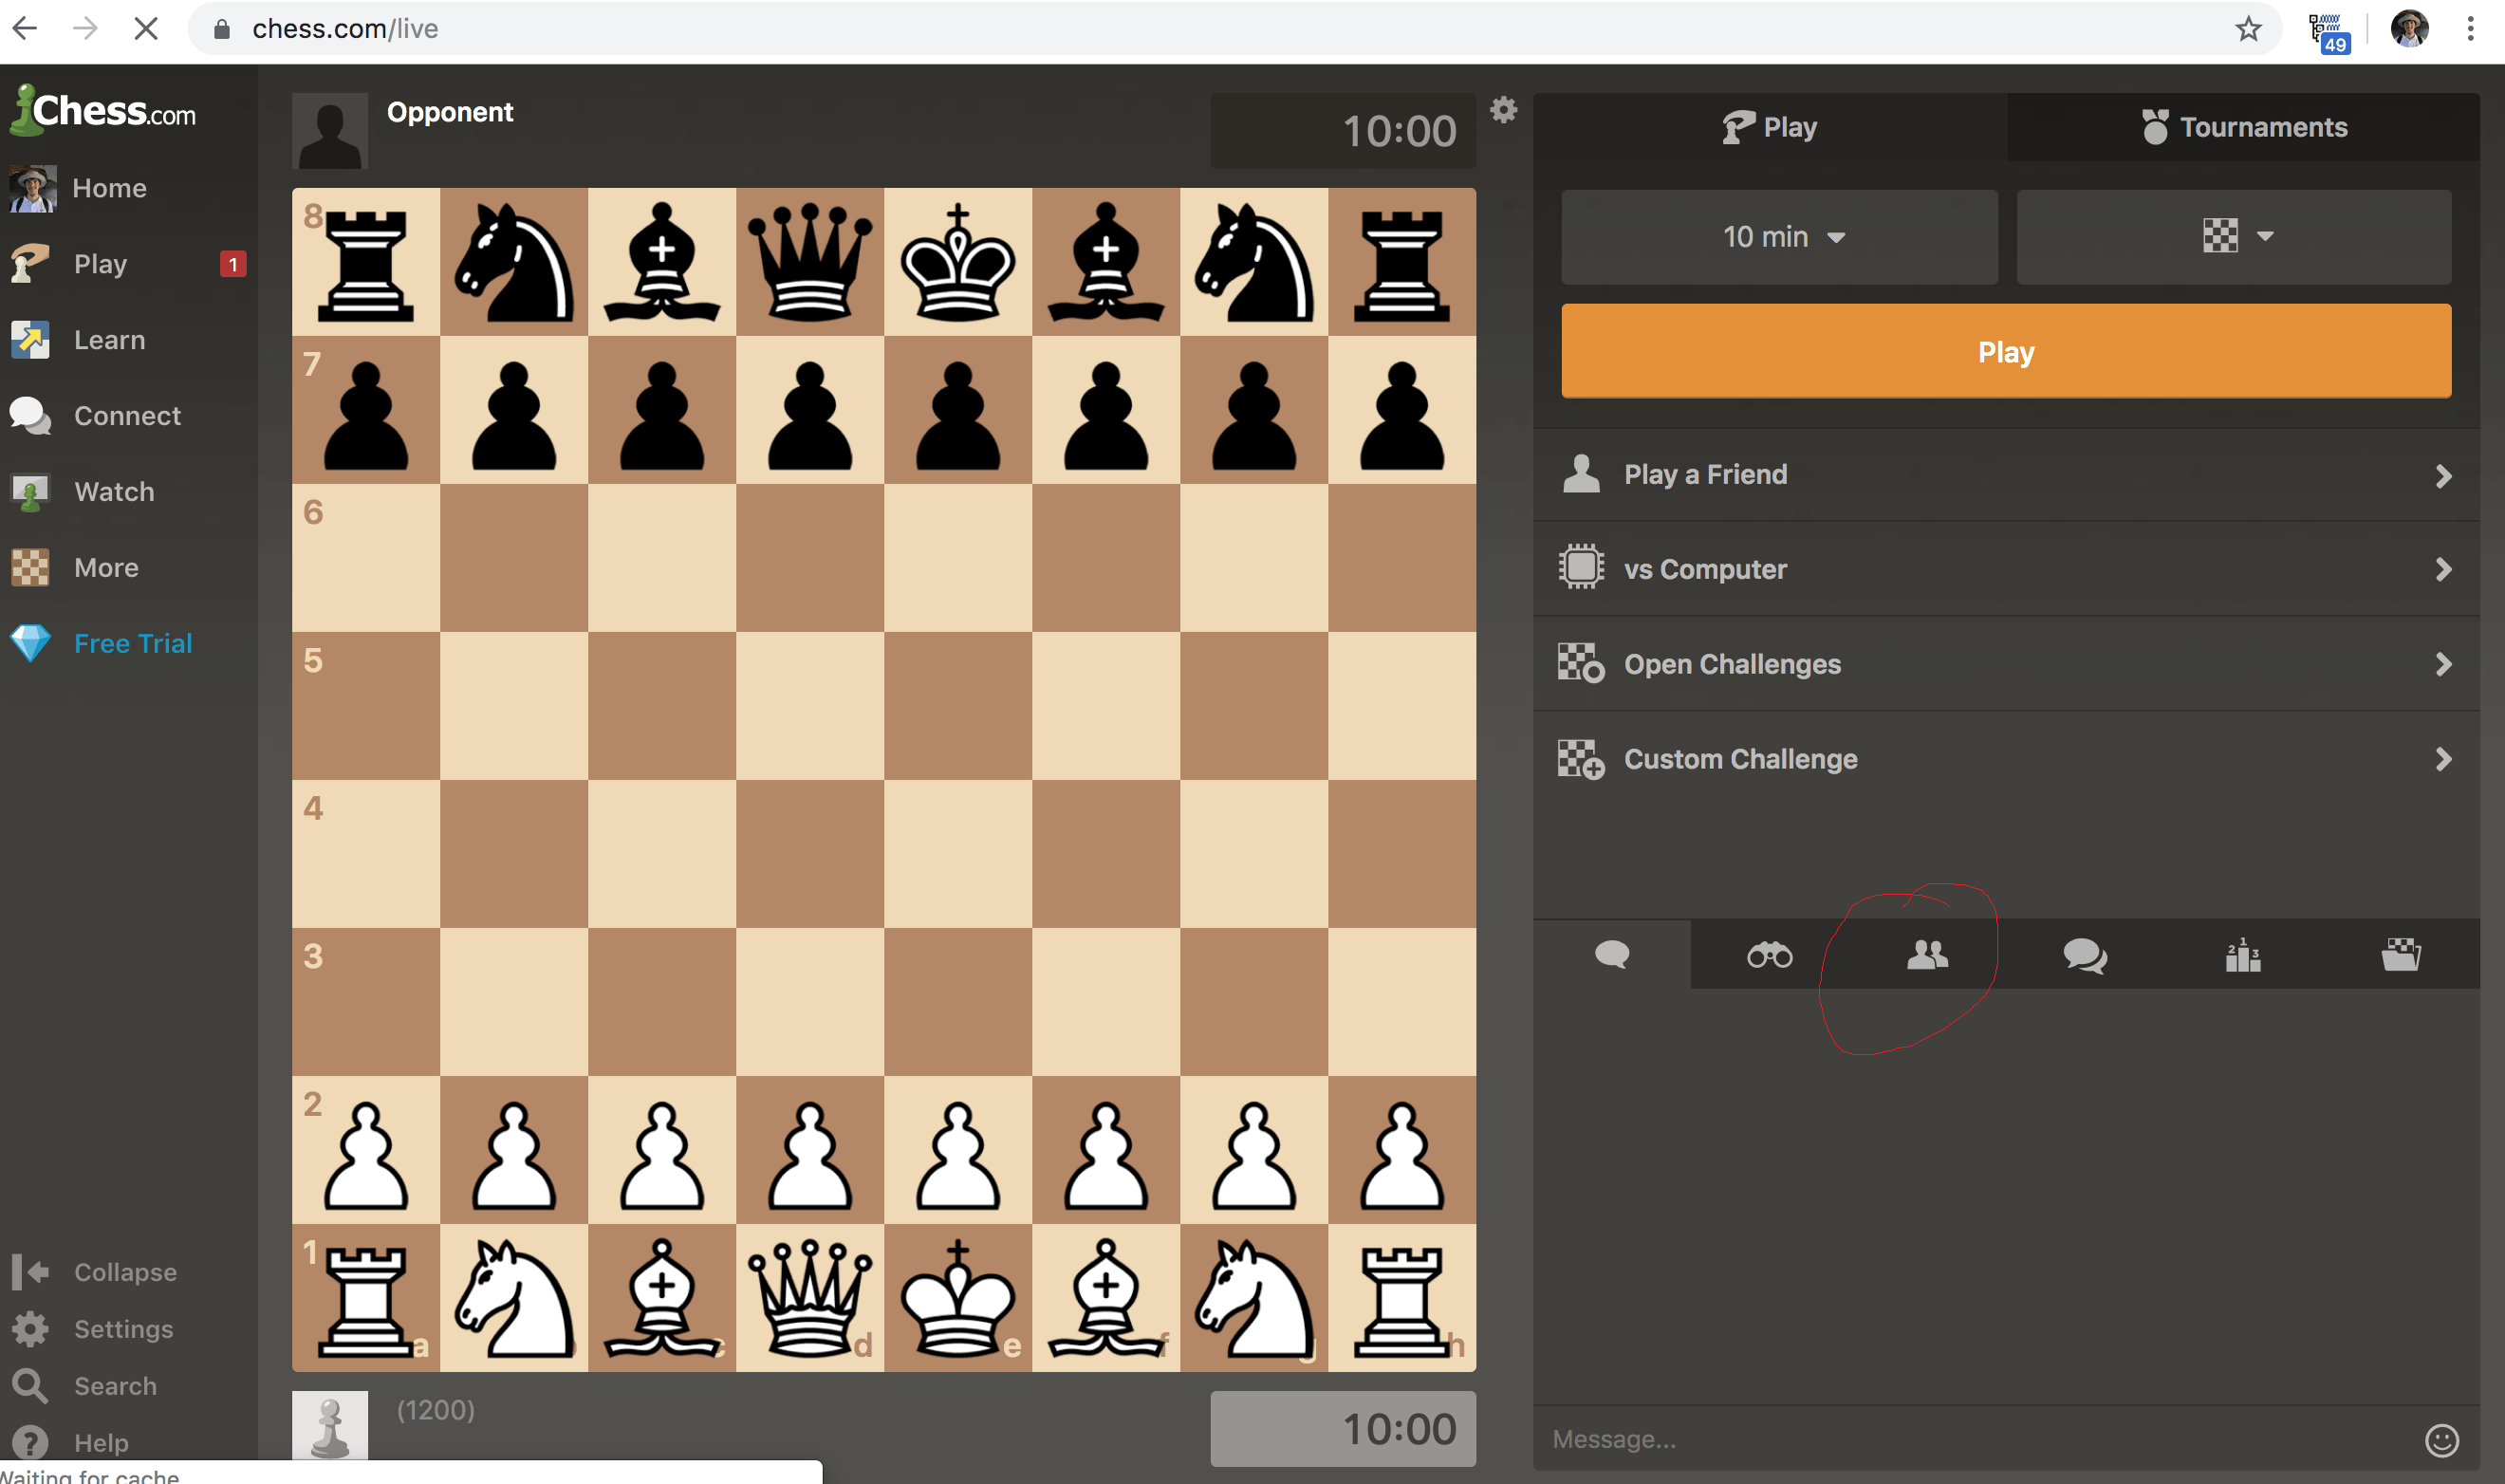 How to play chess online with friends - Chess.com -Tutorial 